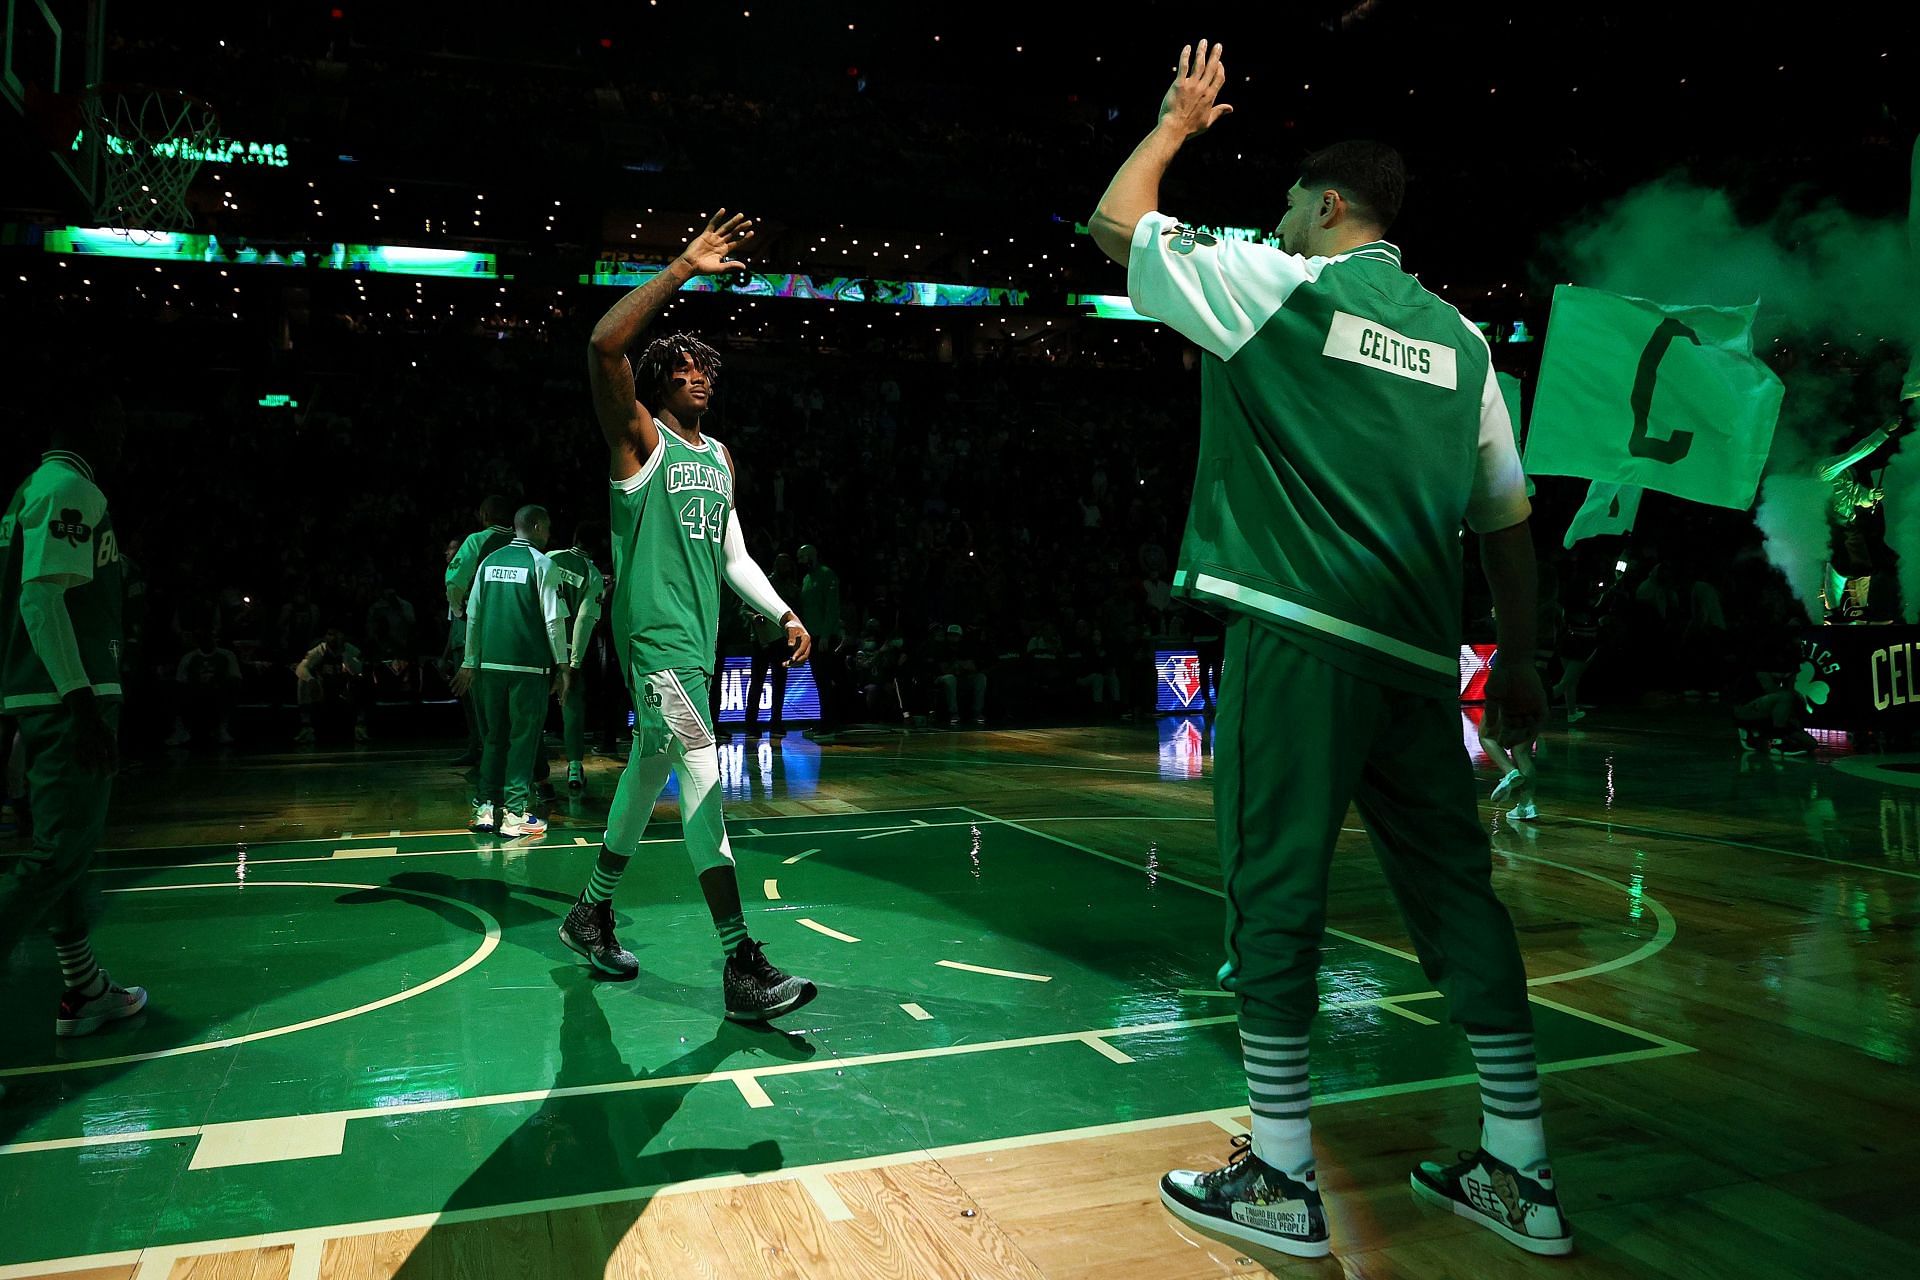 The Boston Celtics have turned their season around by playing lockdown defense.